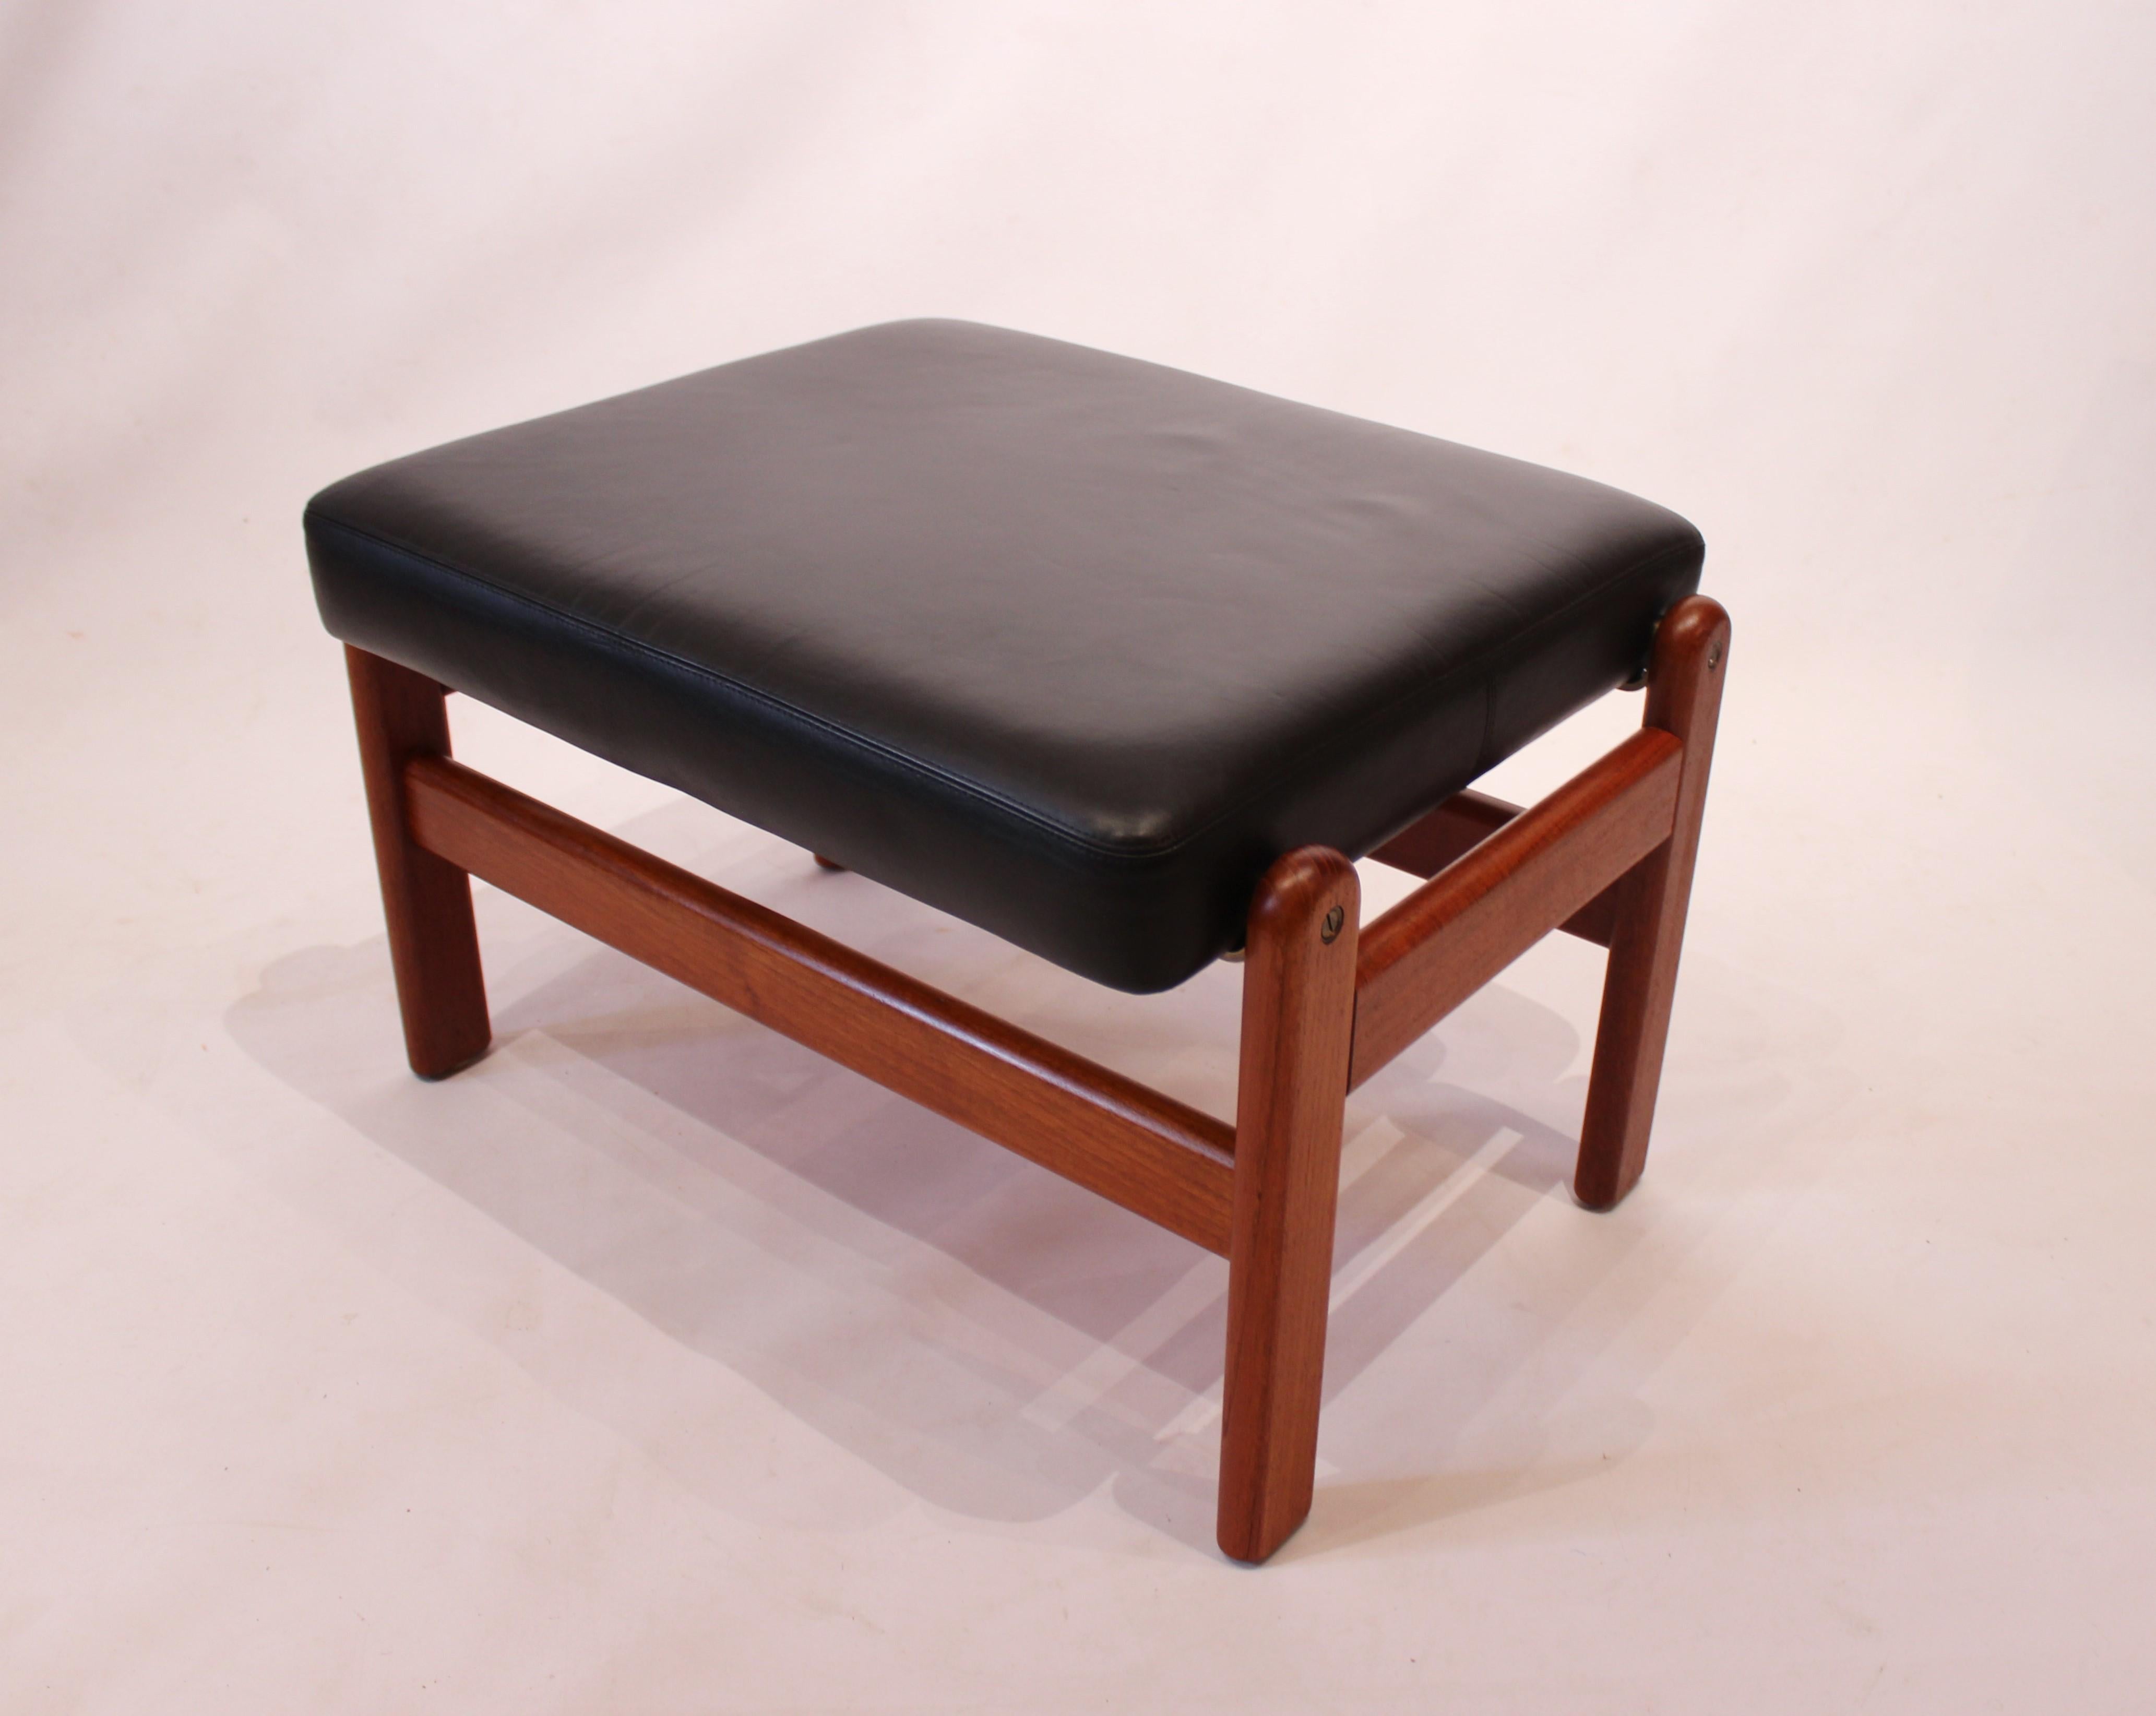 Leather Scandinavian Modern Teak Easy Chair with Stool, by Jørgen Bækmark and FDB, 1960s For Sale